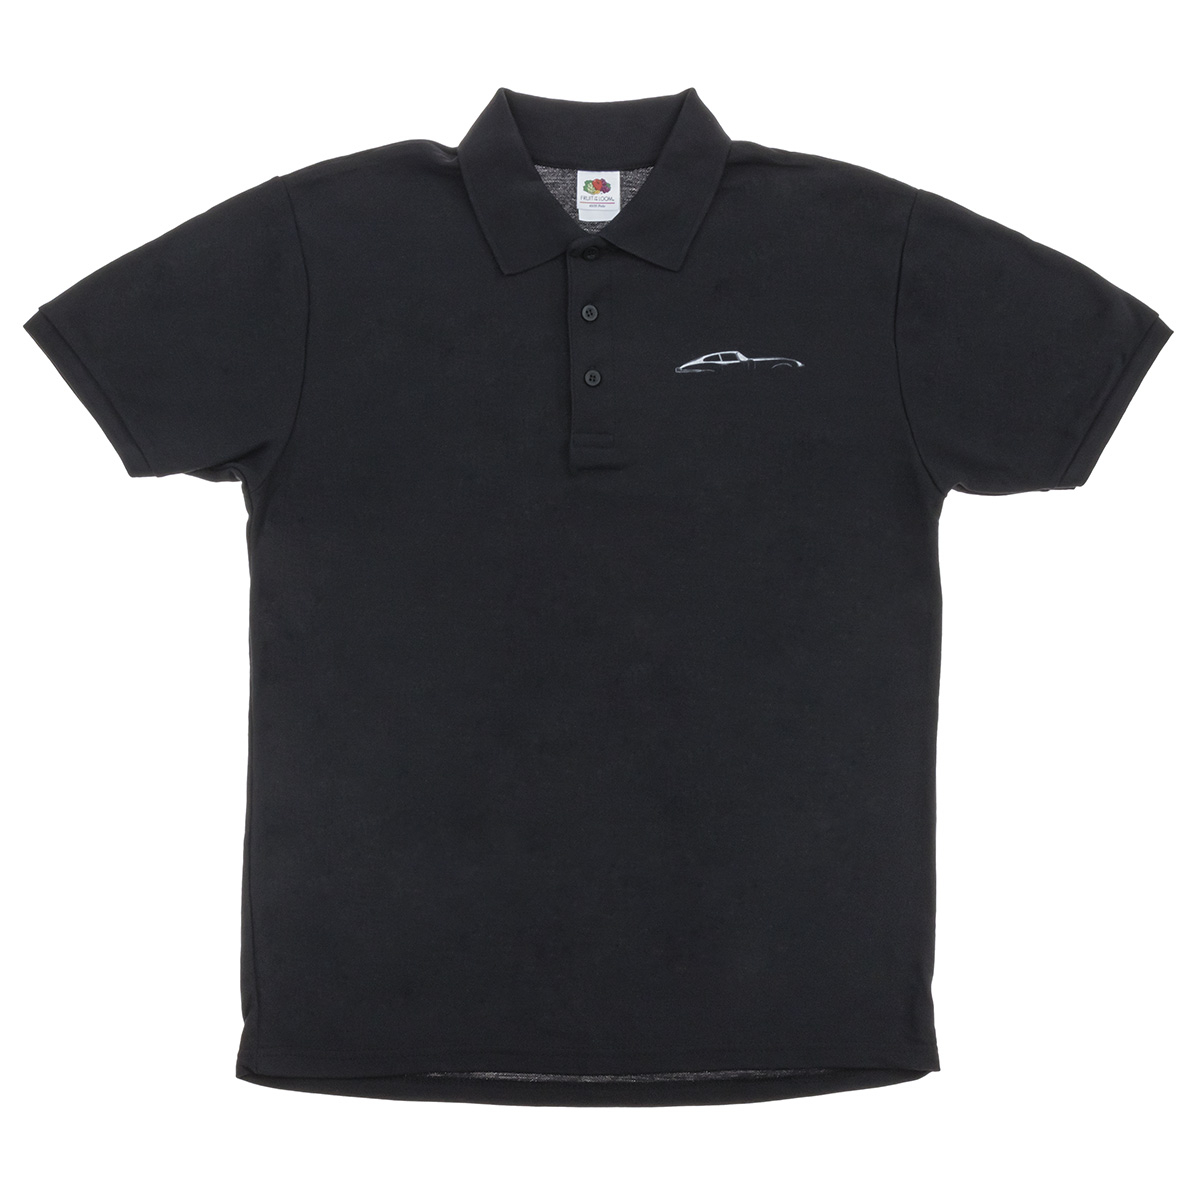 Jaguar E-Type Men's Polo shirt in Black Size S - available also in M/L ...